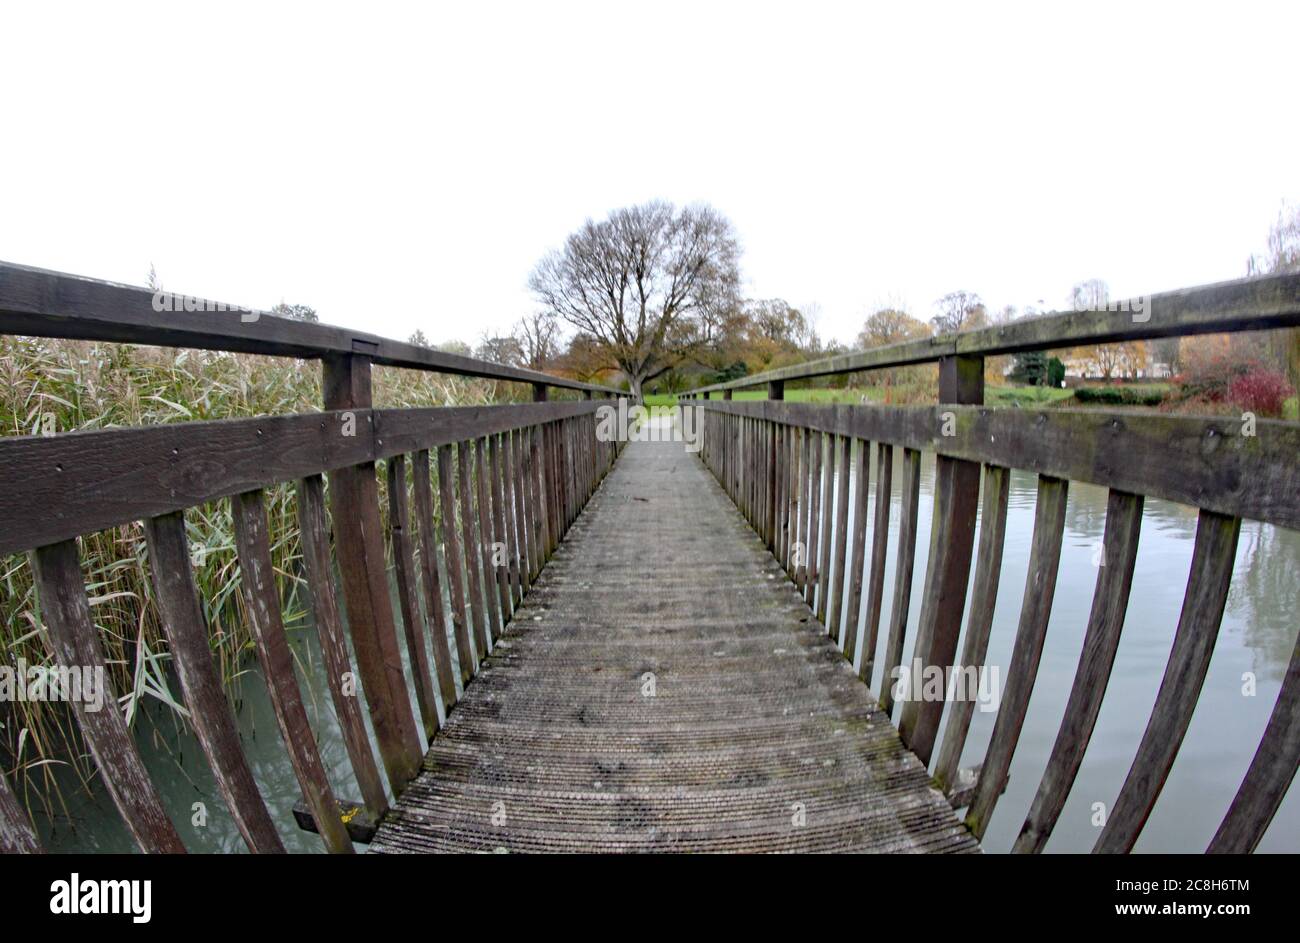 An old wooden bridge taken with a fish eye lens, giving a distorted effect Stock Photo